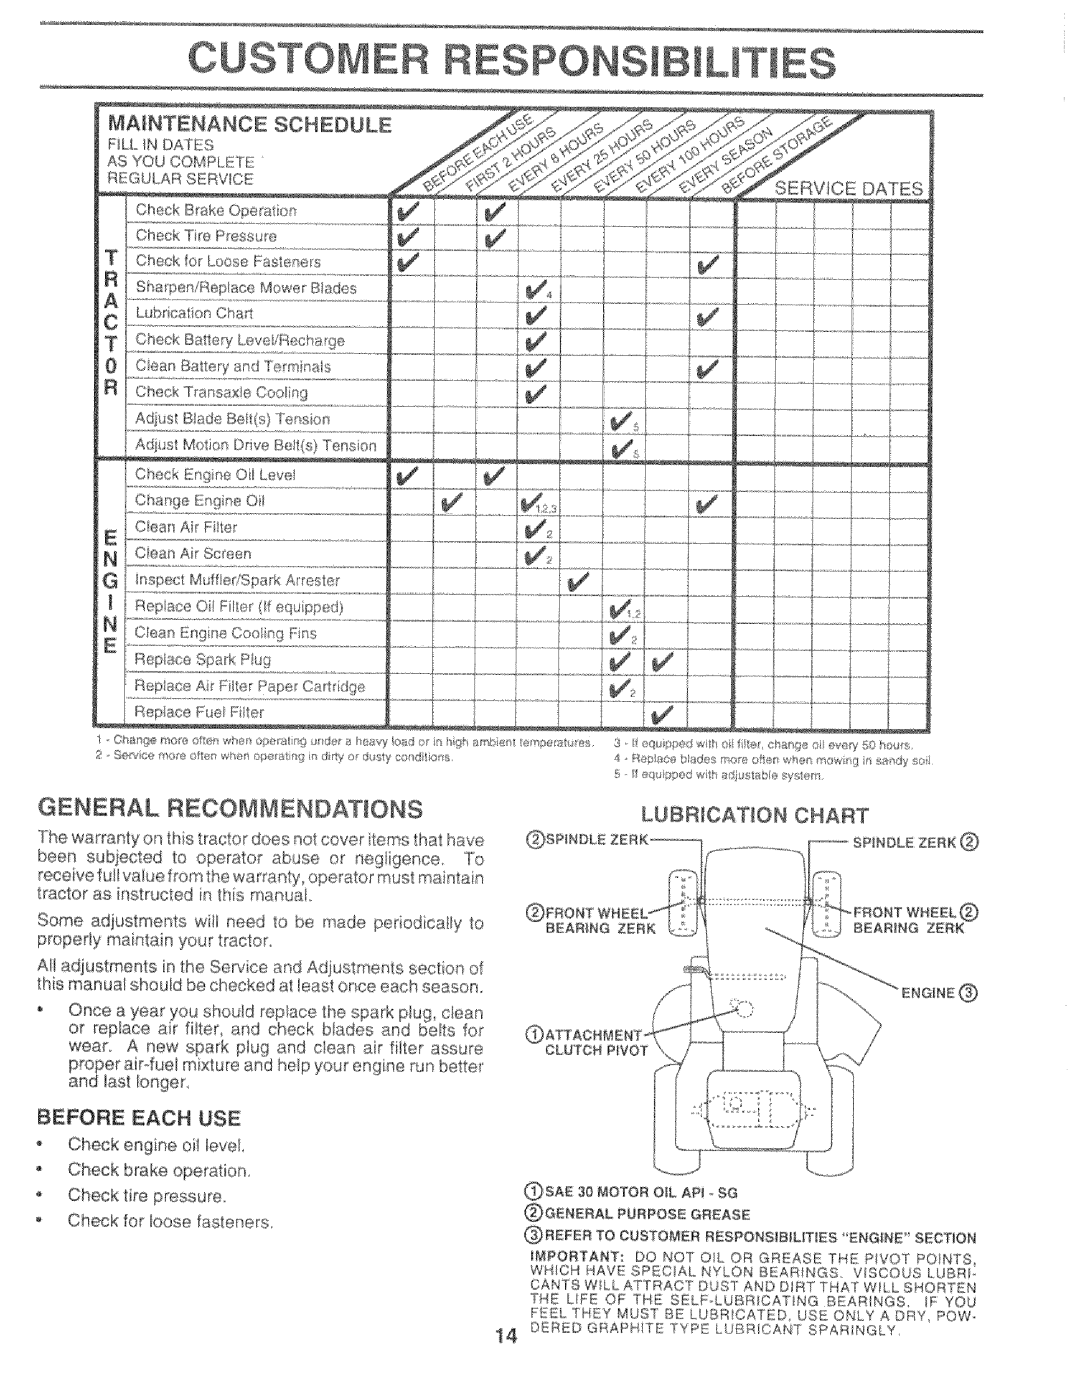 Sears 917.25759 manual General Recommendations, Lubricat On Chart, Before Each Use 